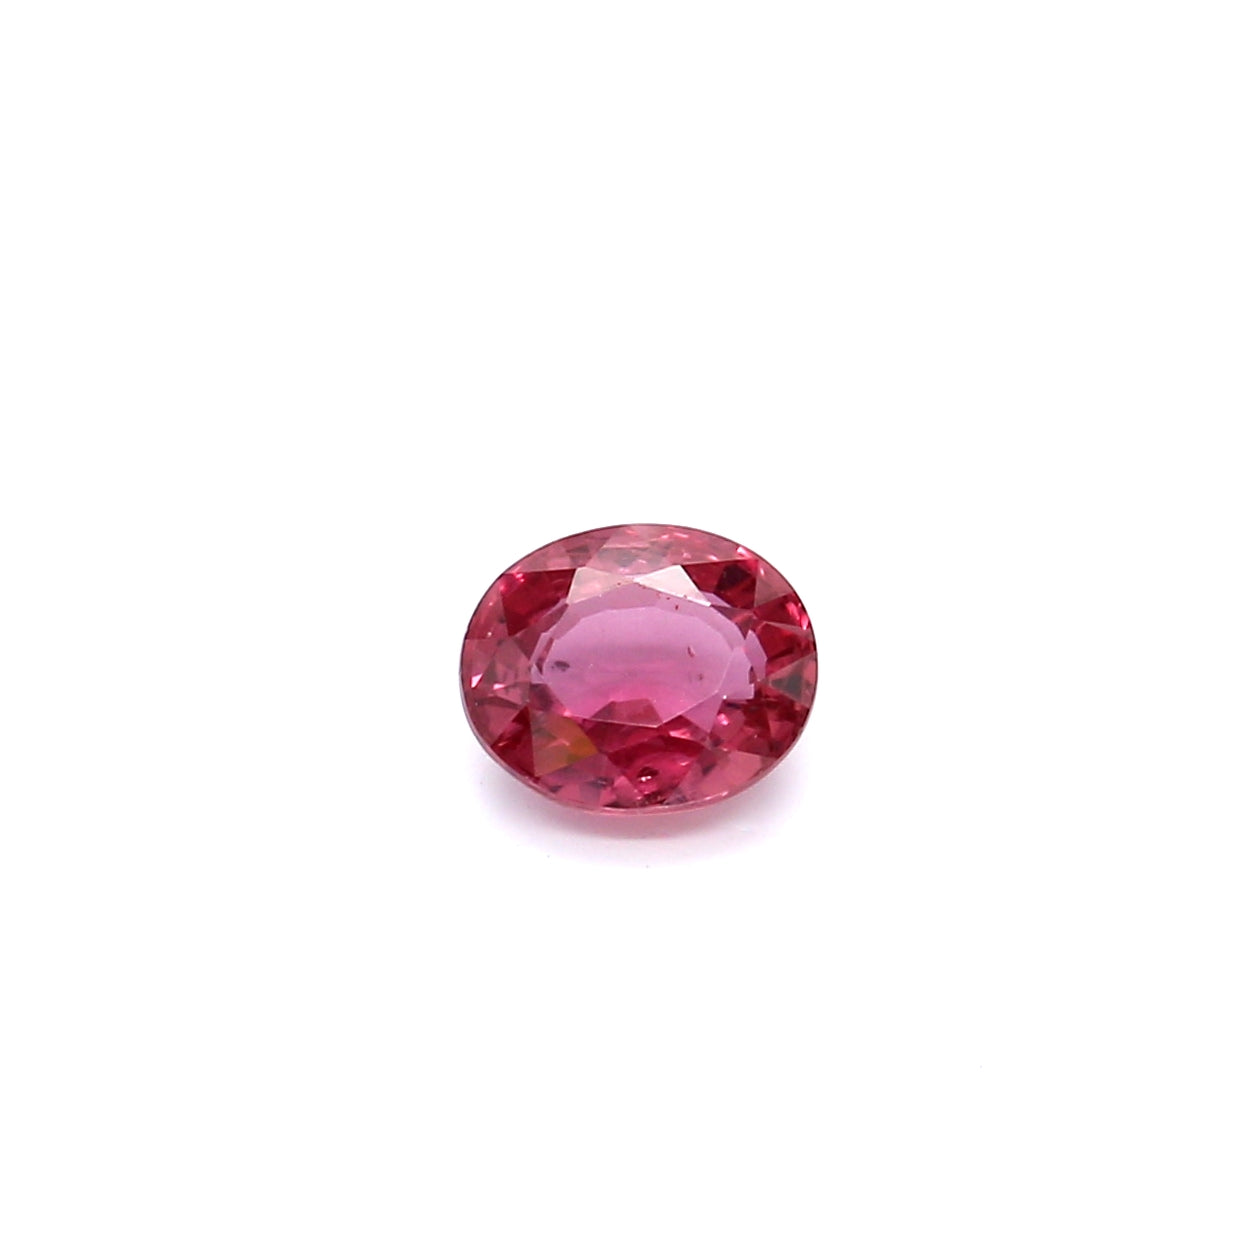 0.92ct Pinkish Red, Oval Ruby, H(a), Thailand - 6.05 x 5.02 x 3.05mm